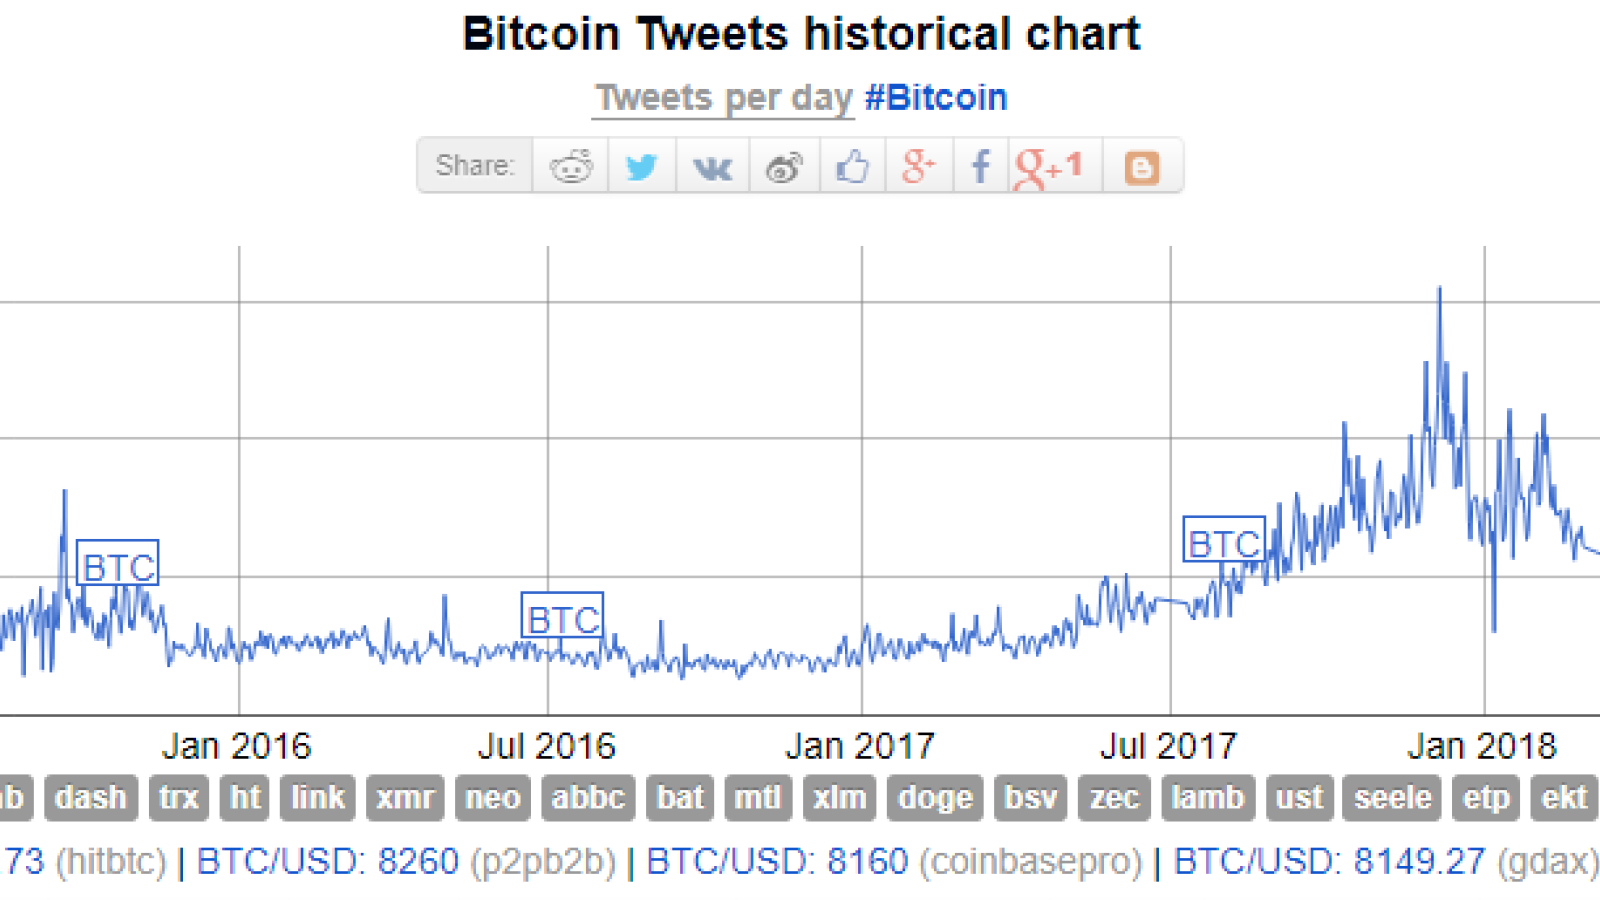 Bitcoin Twitter mentions (2014-2015) 